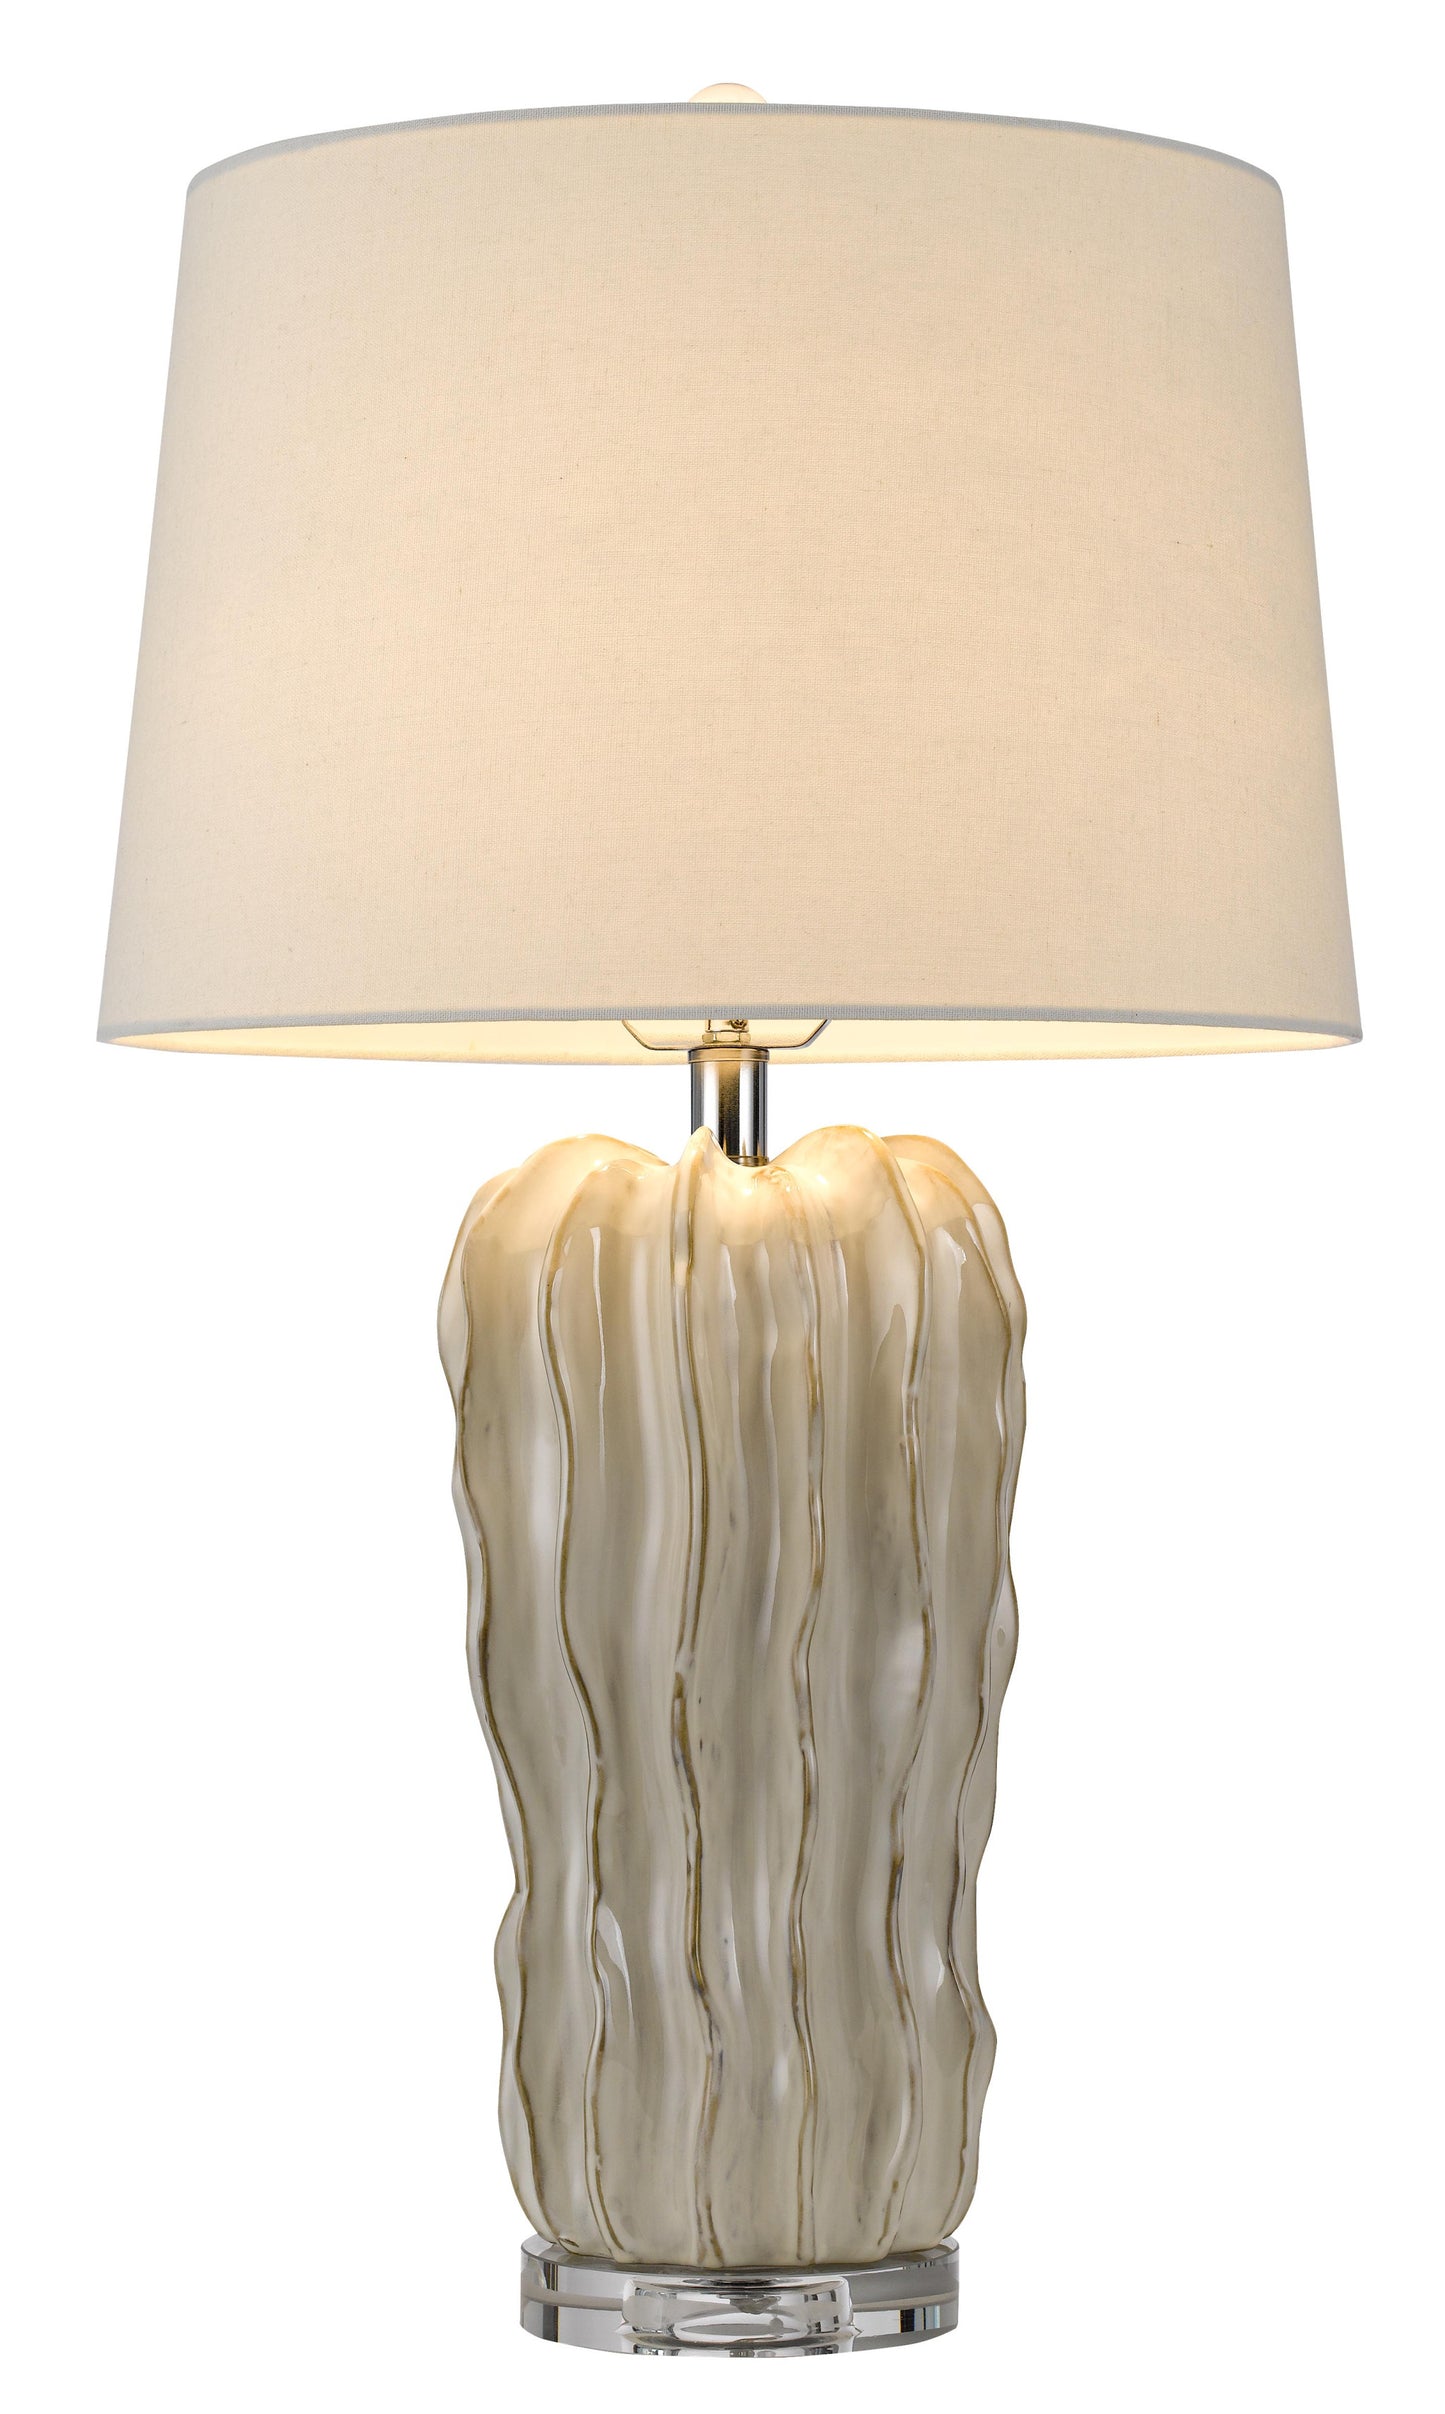 28" Pearl Glass Table Lamp With White Empire Shade